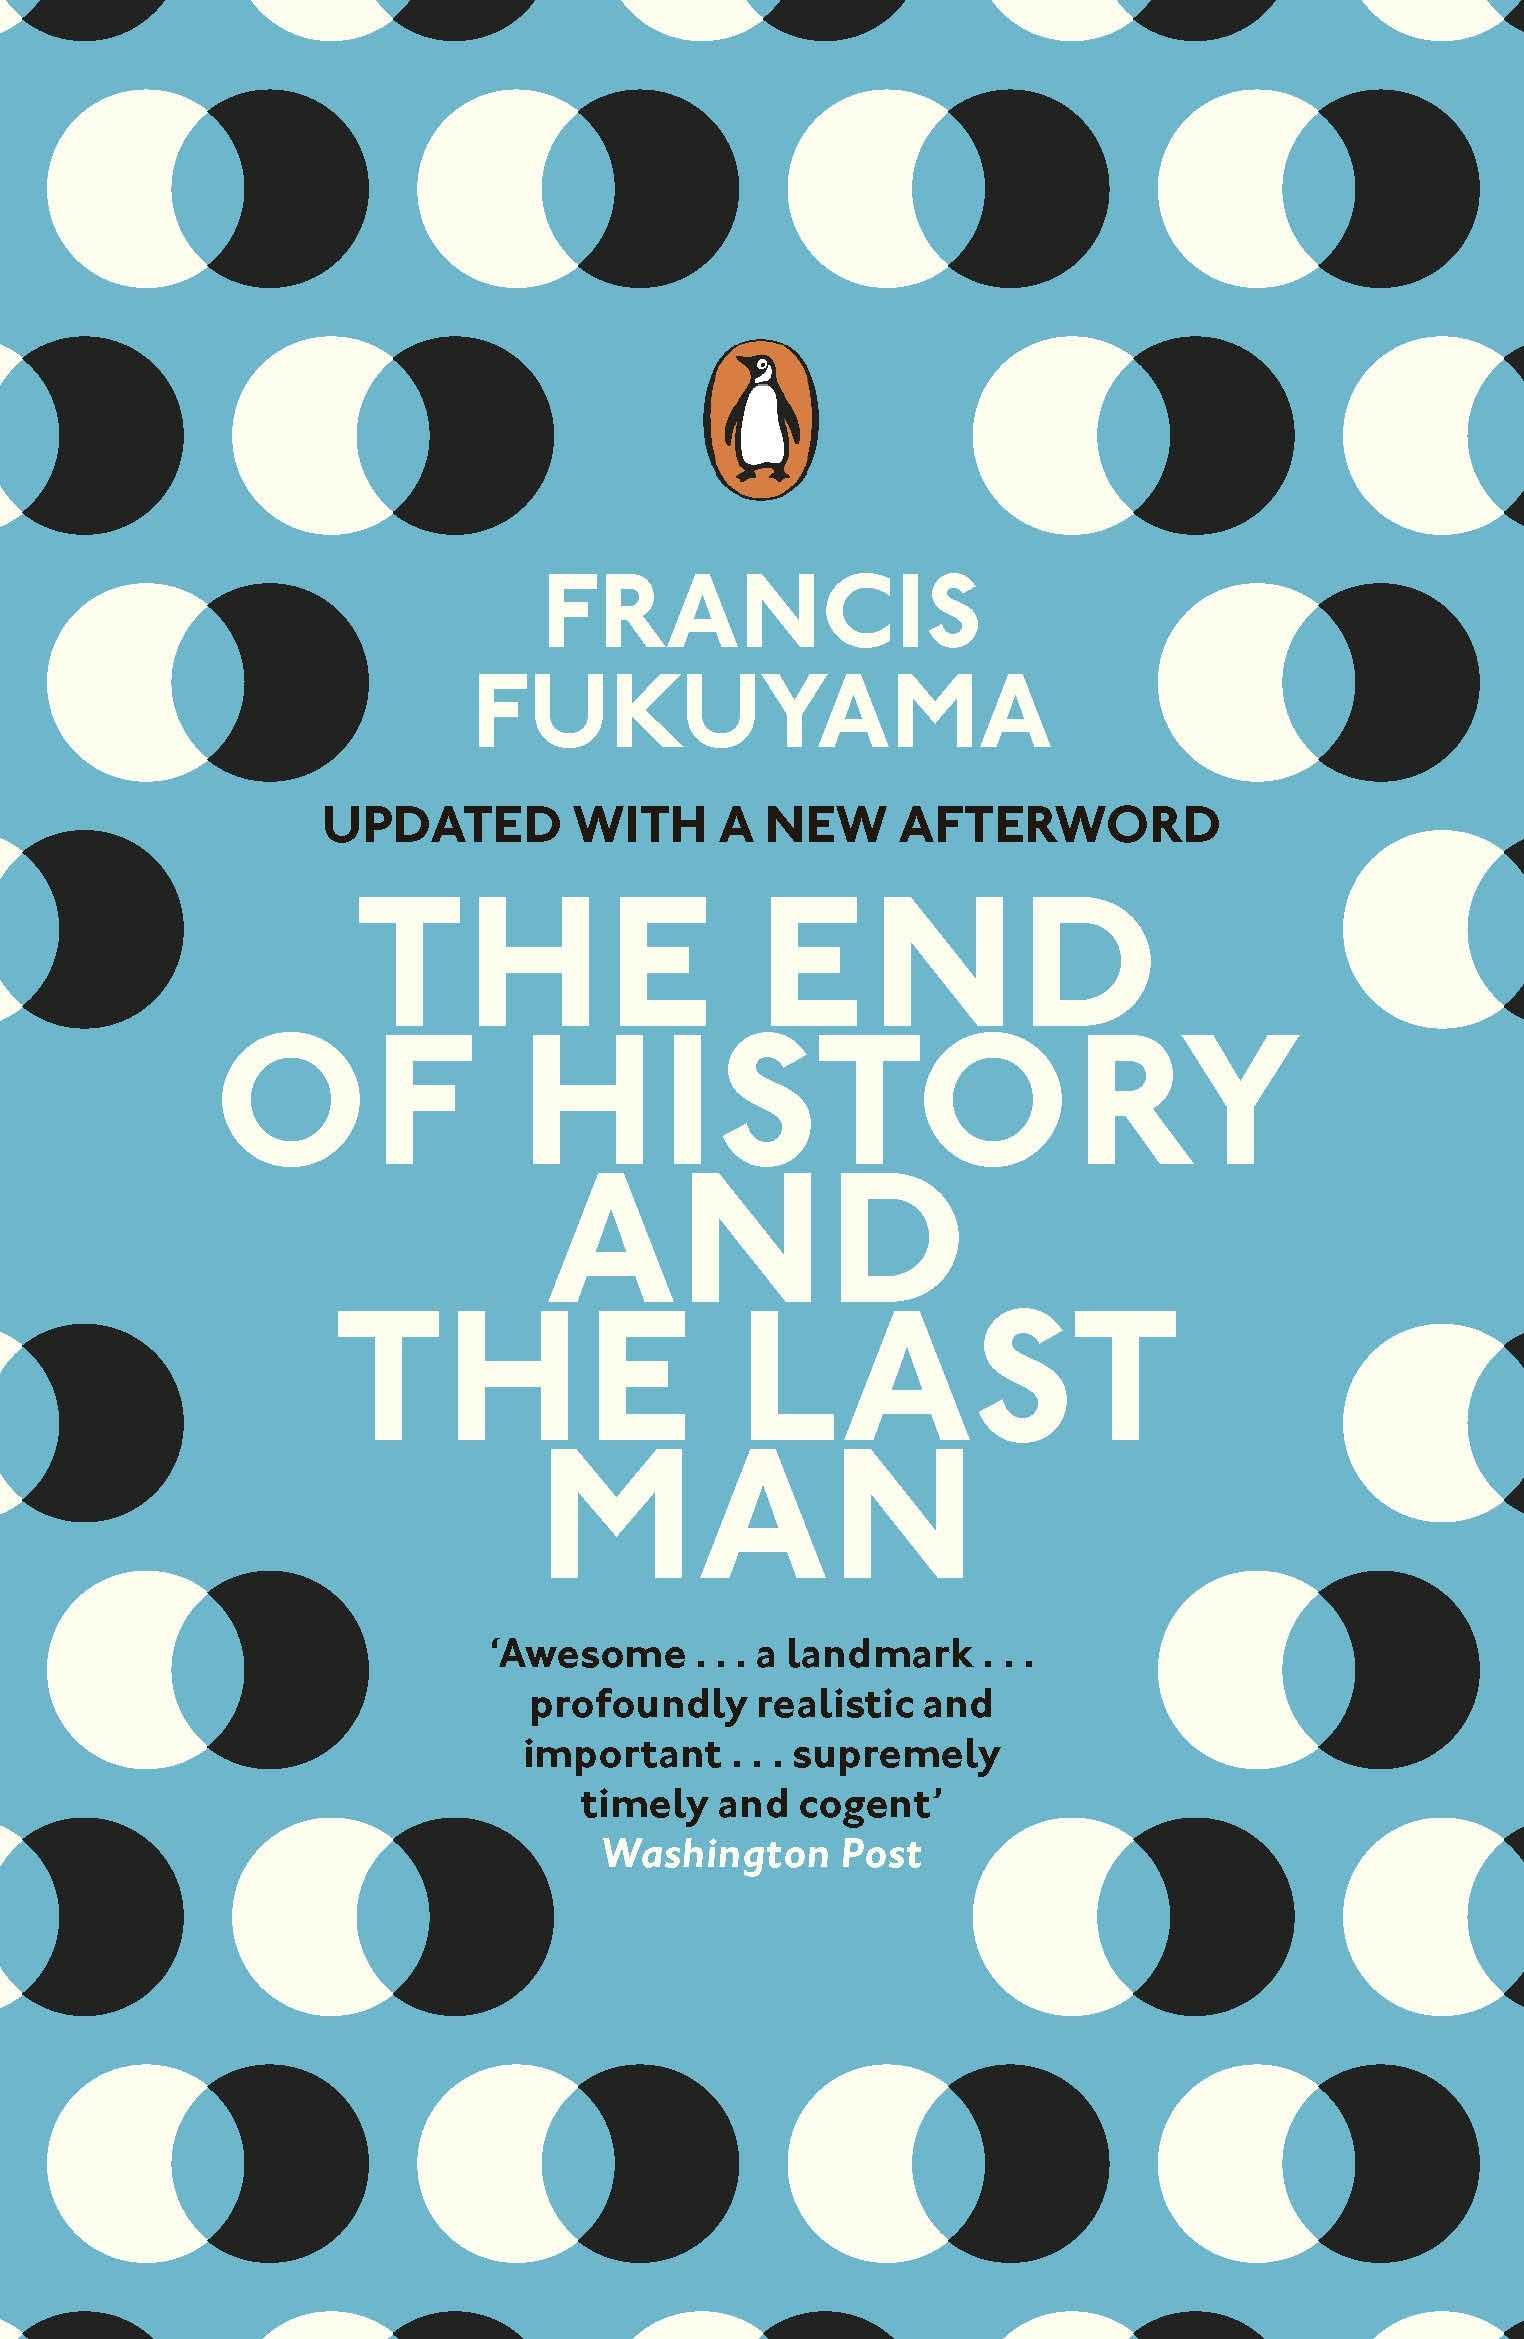 Book “The End of History and the Last Man” by Francis Fukuyama — September 17, 2020